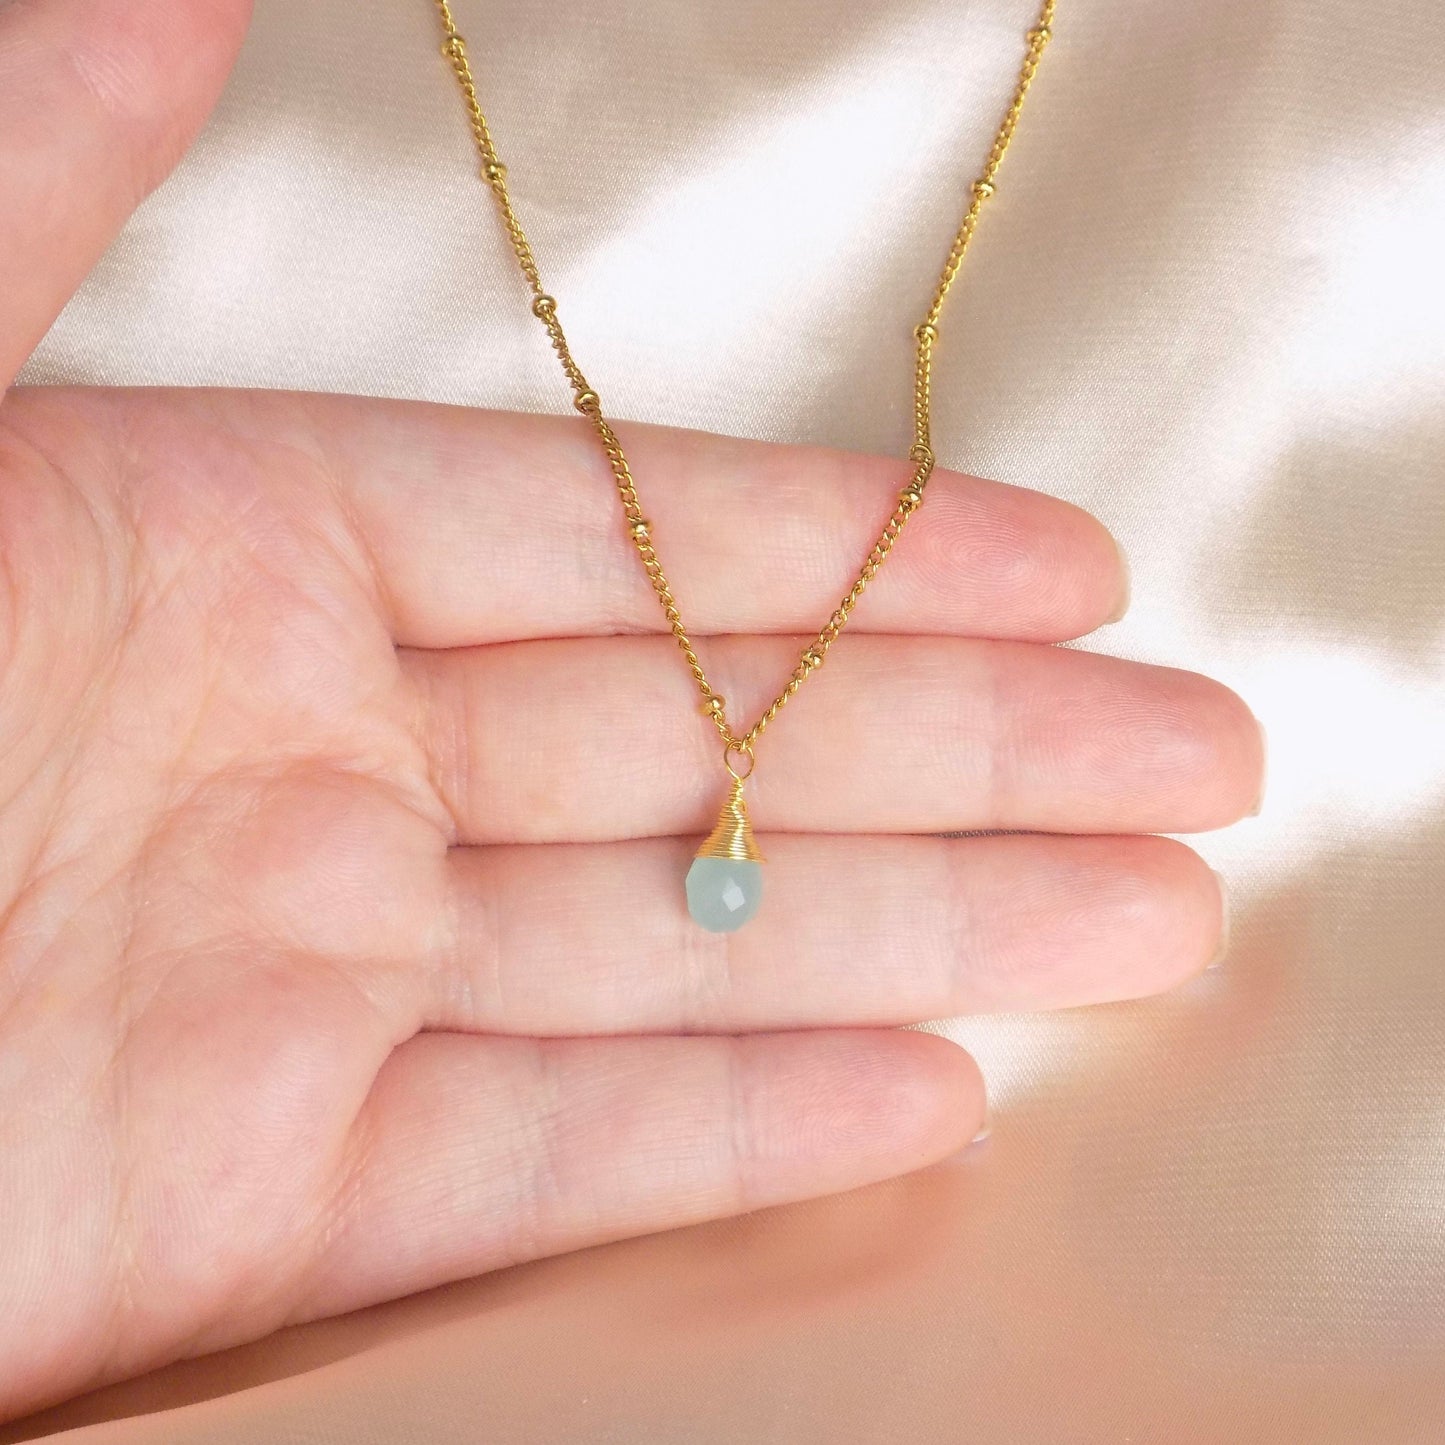 Gold Satellite Chain With Small Aqua Chalcedony Charm, 18K Gold Stainless Steel, Minimalist Layer, M7-73